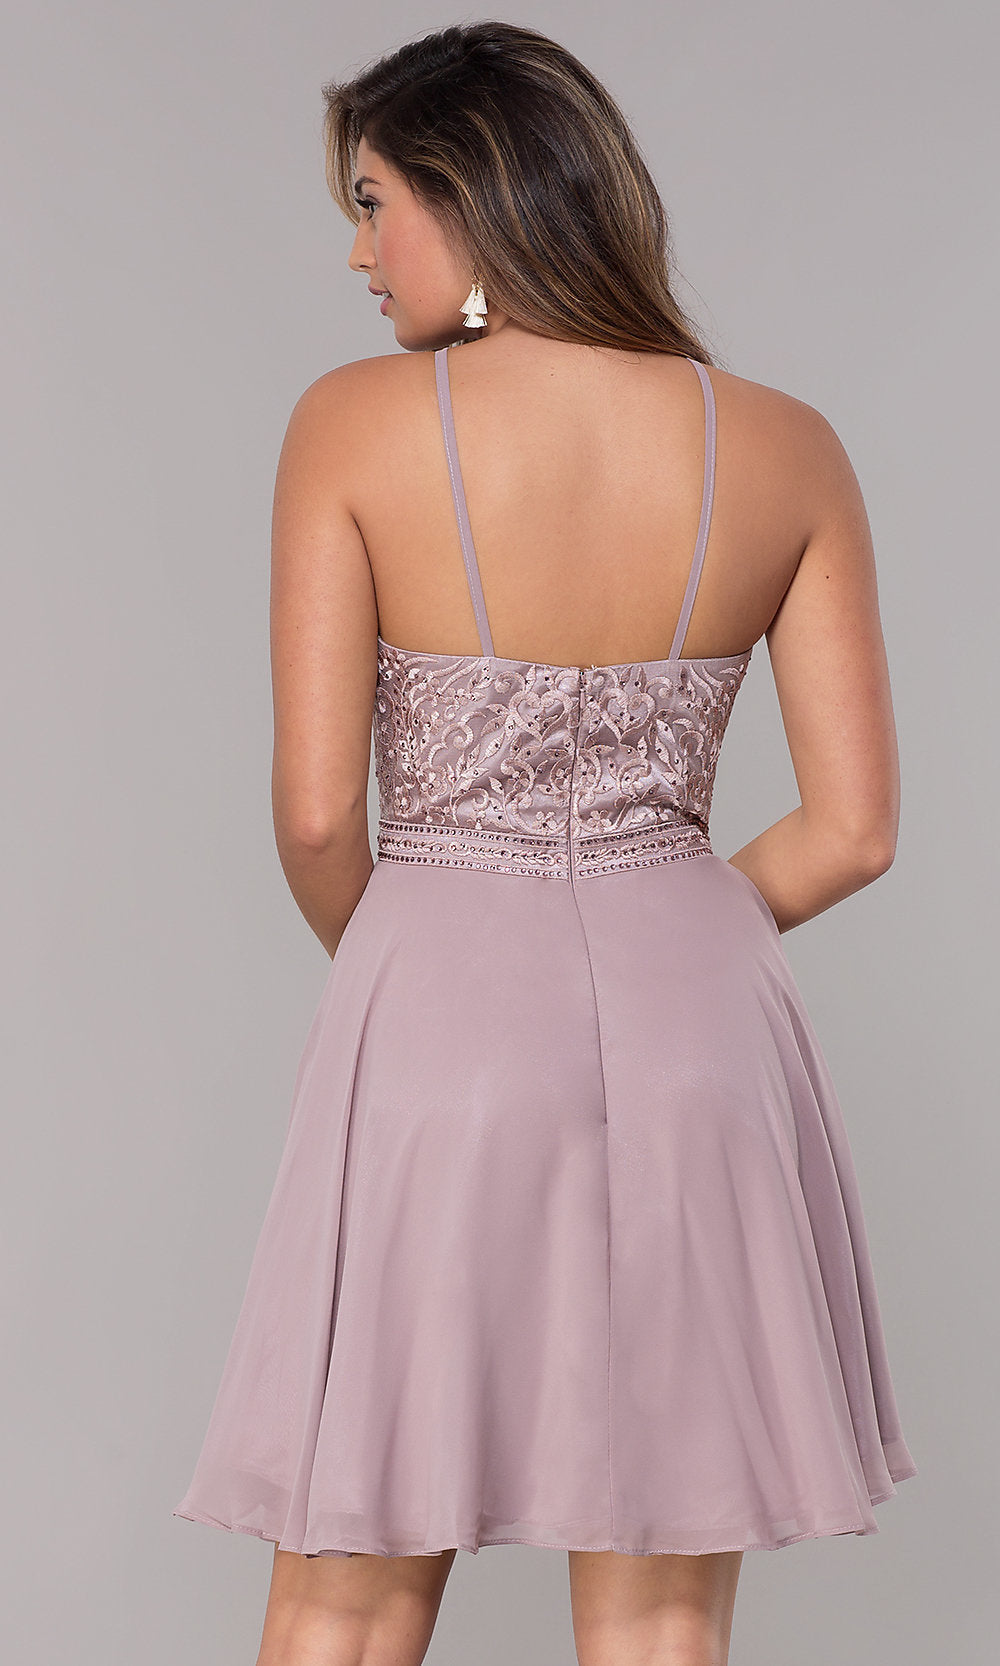  Embroidered-Bodice Short A-Line Homecoming Dress